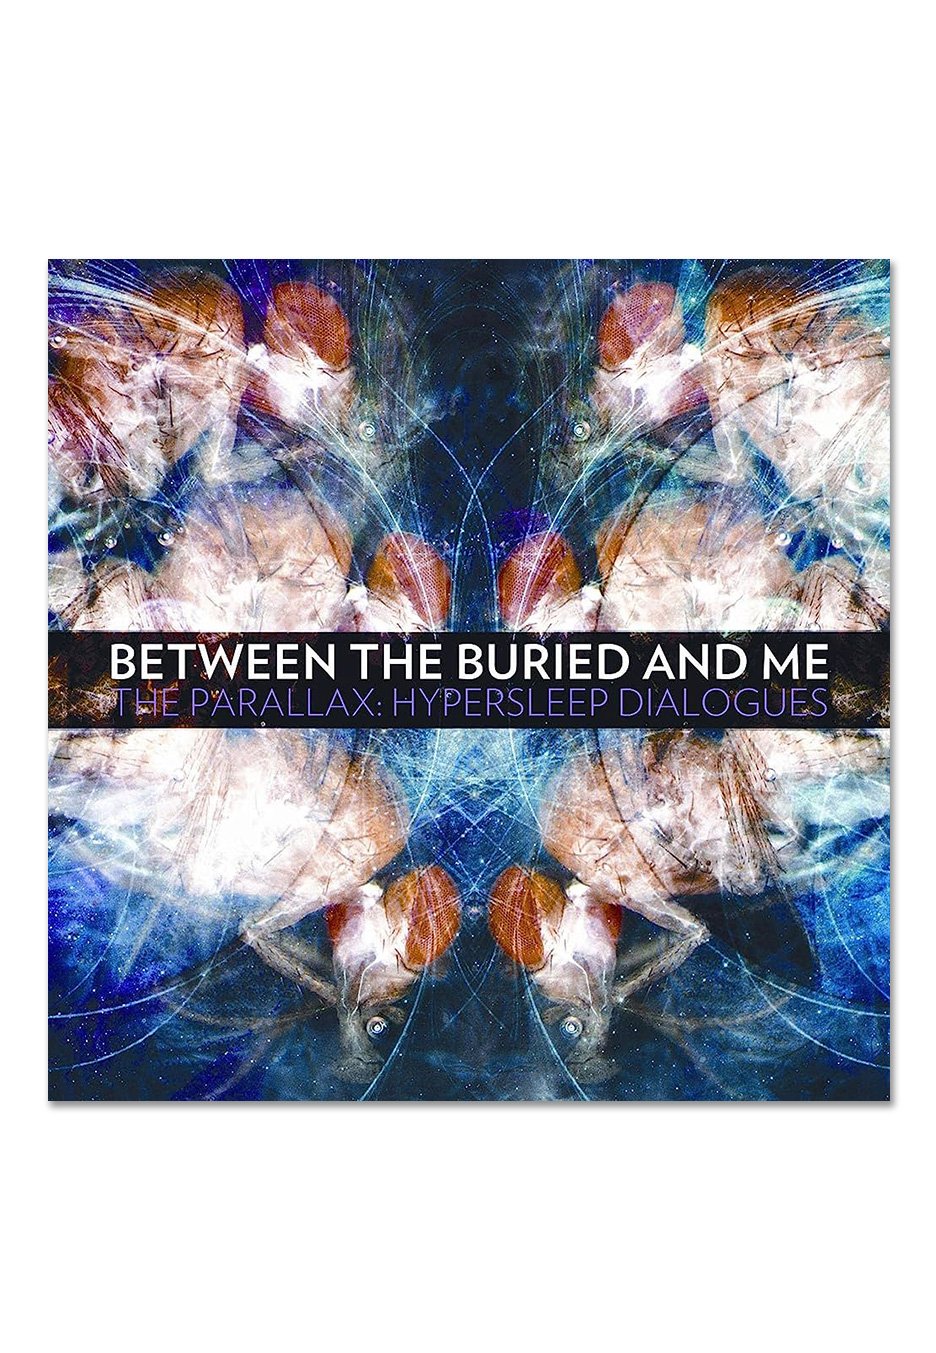 Between The Buried And Me - The Parallax I Galaxy Orange Black - Colored 2 Vinyl